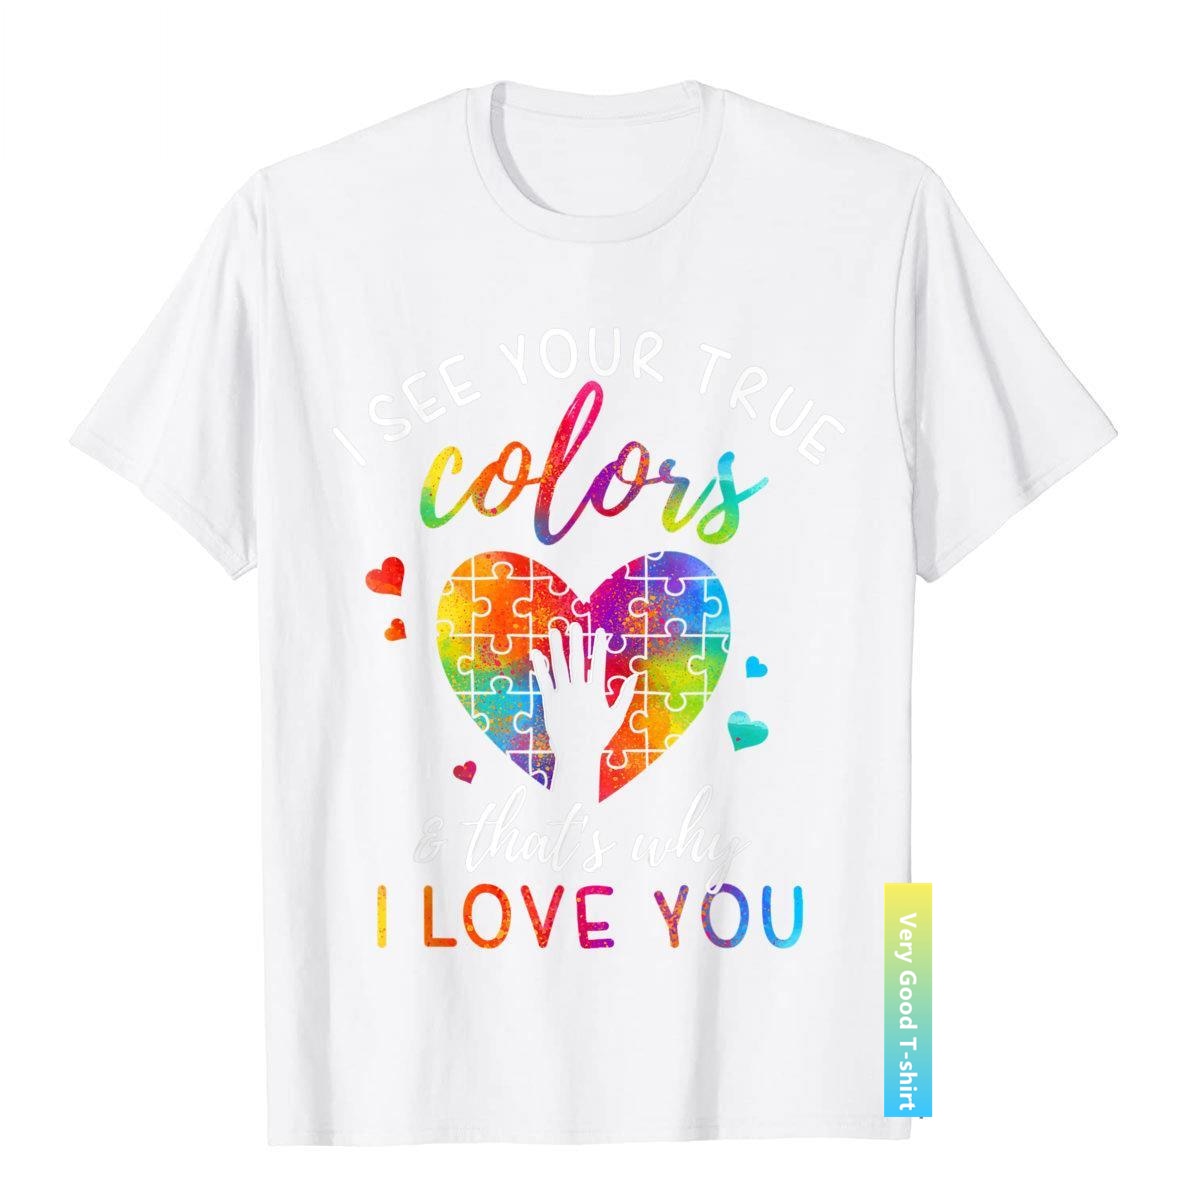 I See Your True Colors Puzzle World Autism Awareness T-Shirt